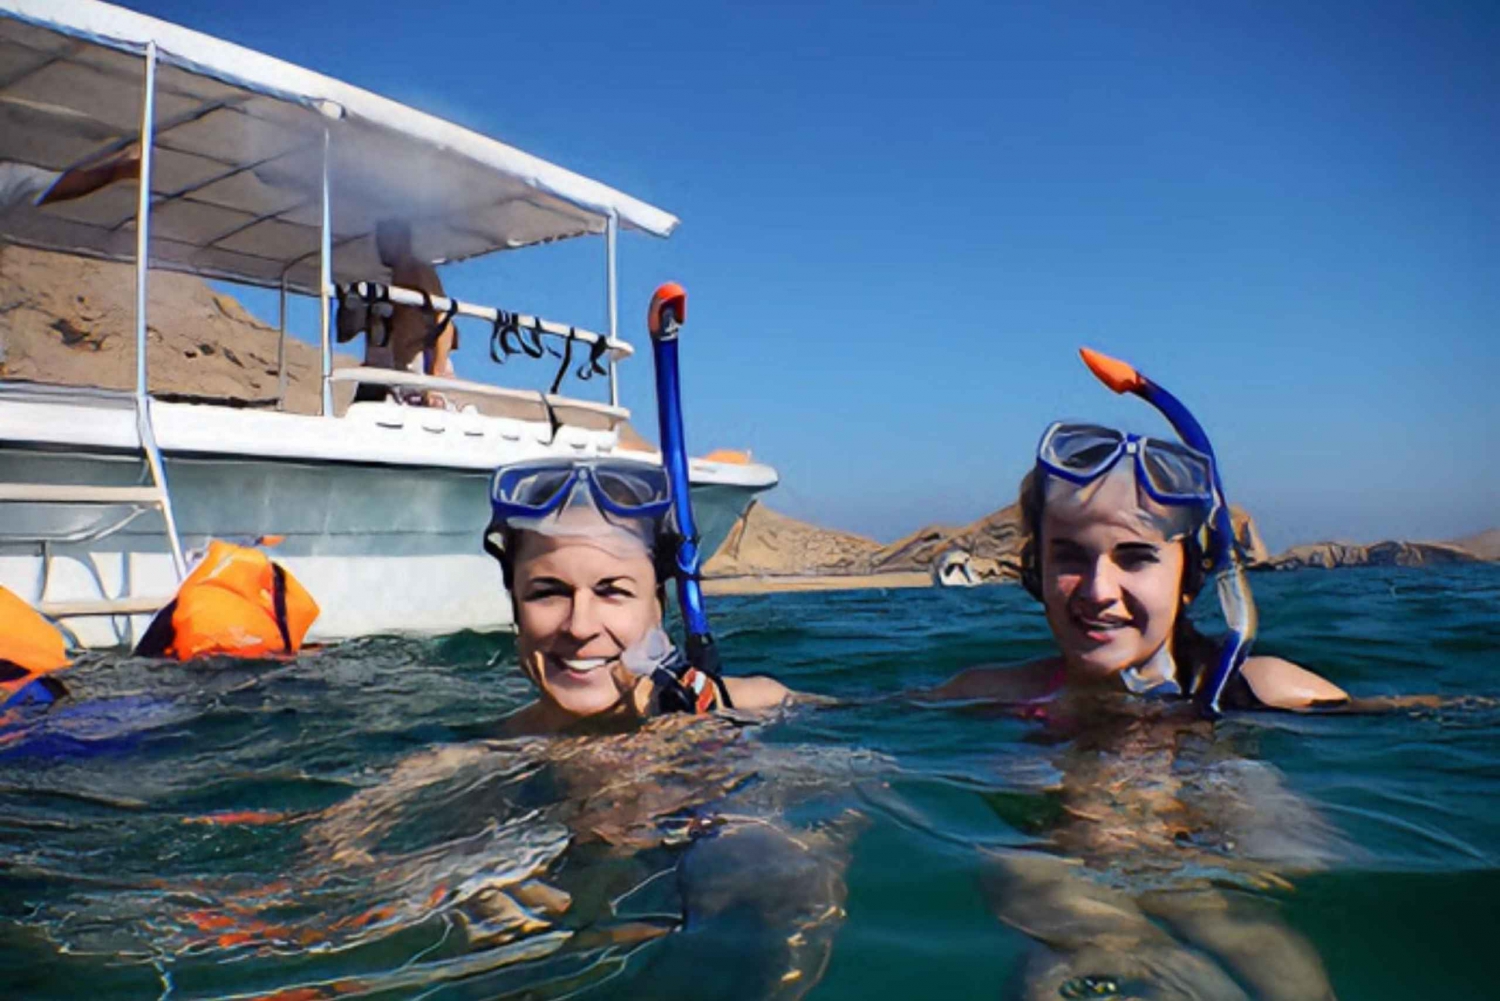 DOLPHINS AND SNORKELING TRIP